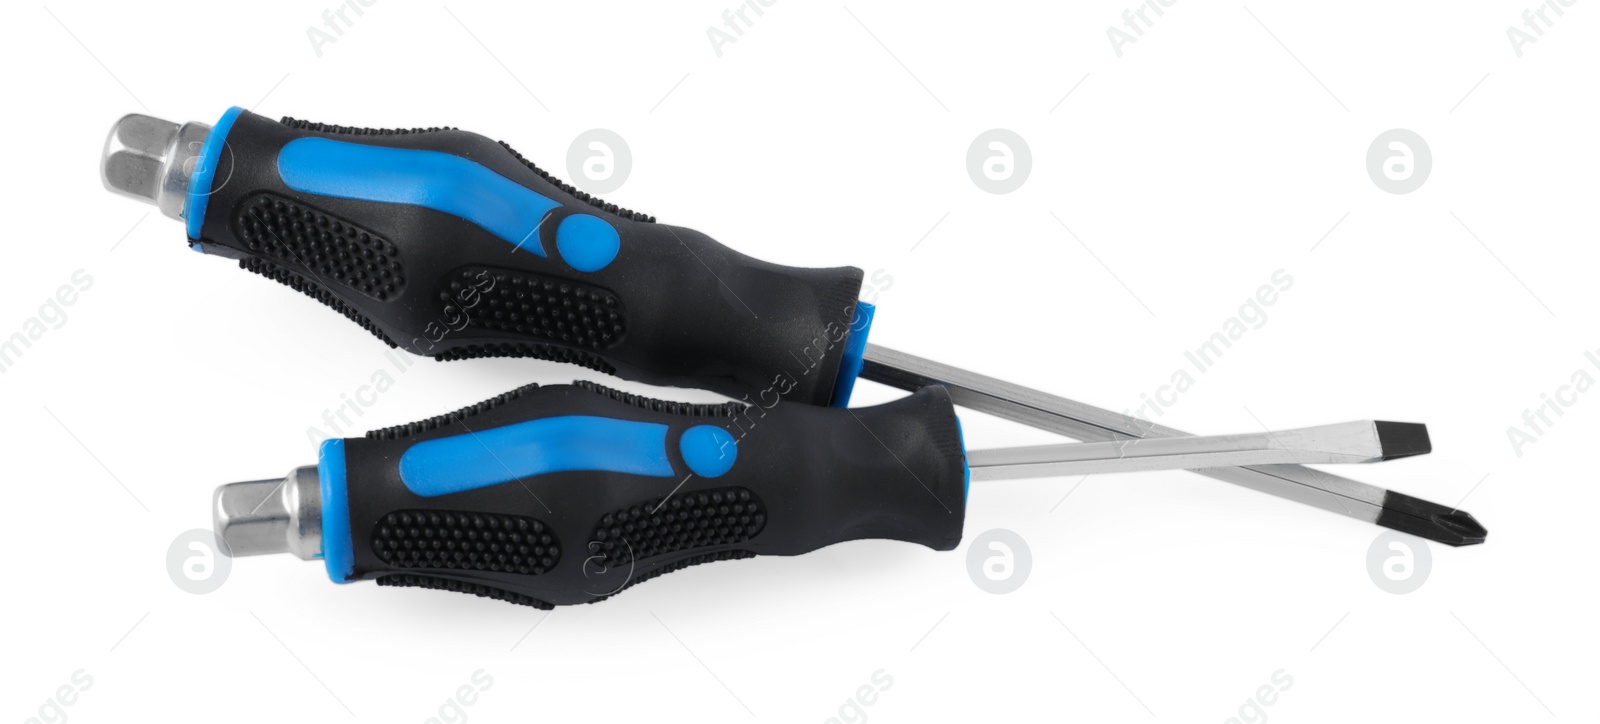 Photo of Two screwdrivers with blue handles isolated on white